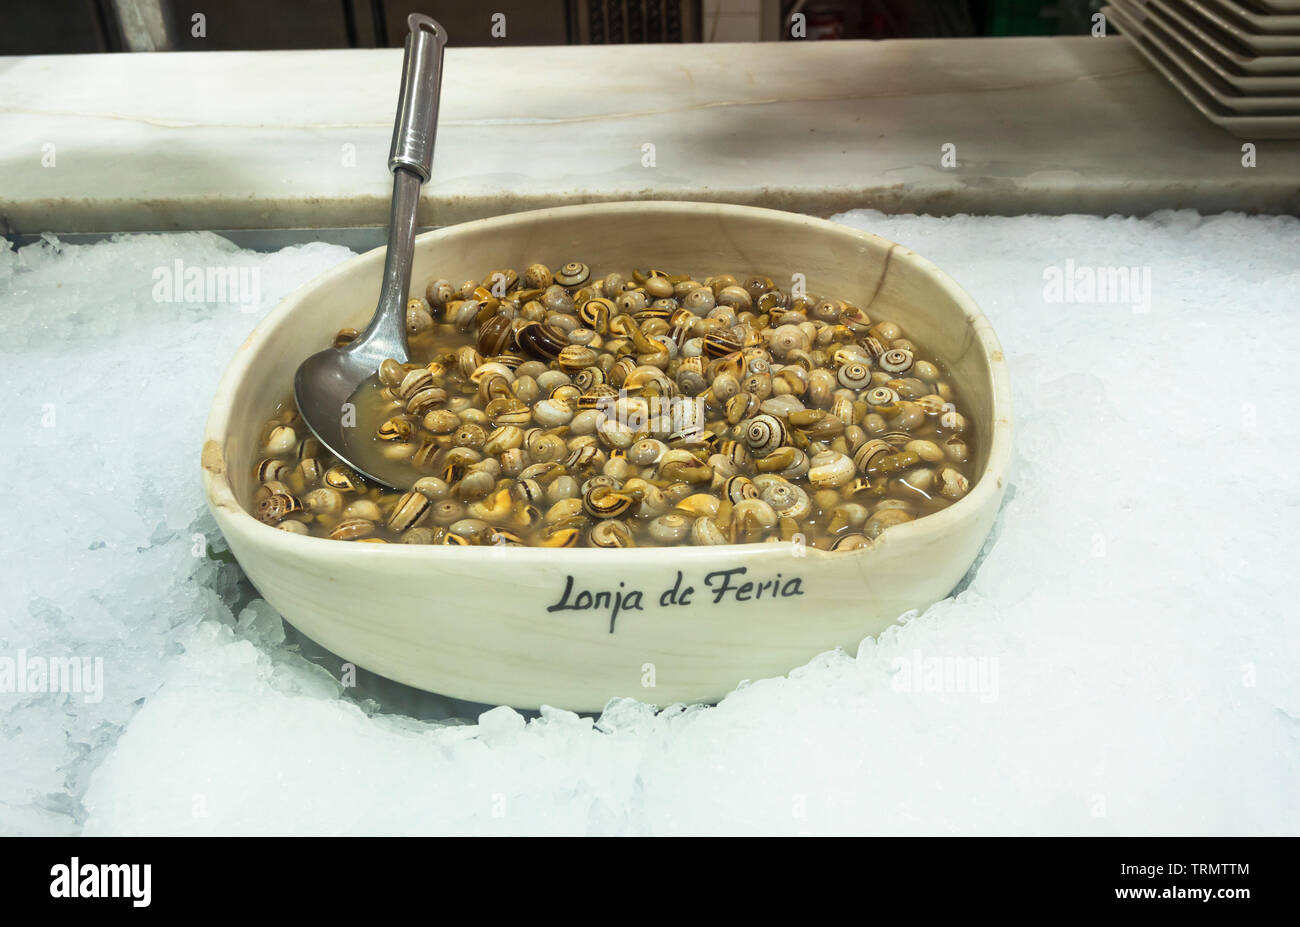 A bowl of fresh periwinkles in the Feria Market in Seville Stock Photo